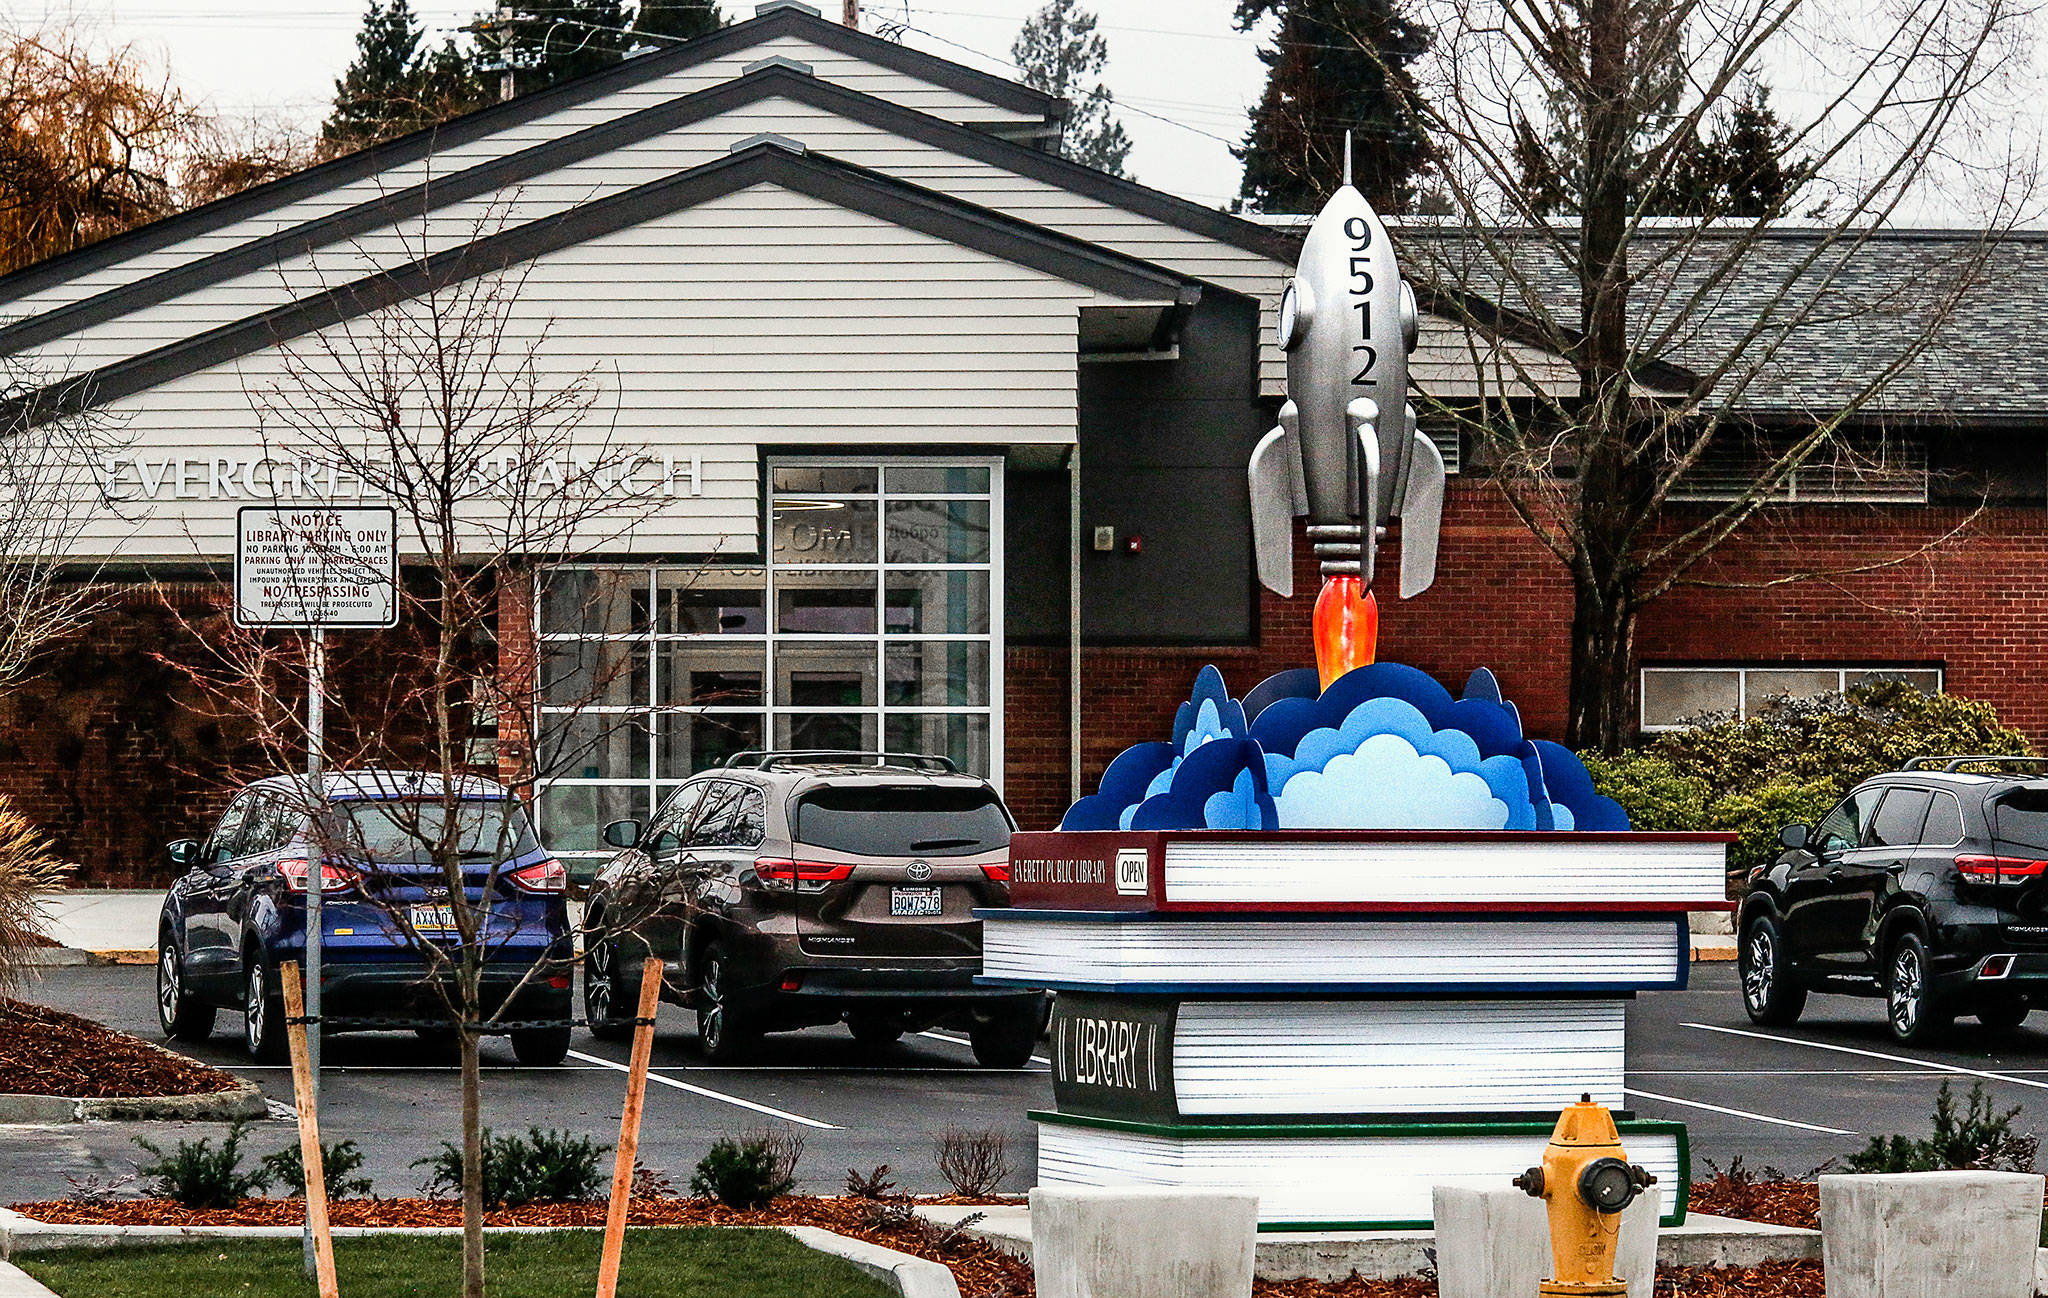 The Evergreen Branch of the Everett Public Library is open and ready for blast off. Dillon Works, of Mukilteo, designed this eye-catching sculpture that greets people along Evergreen Way. (Dan Bates / The Herald)